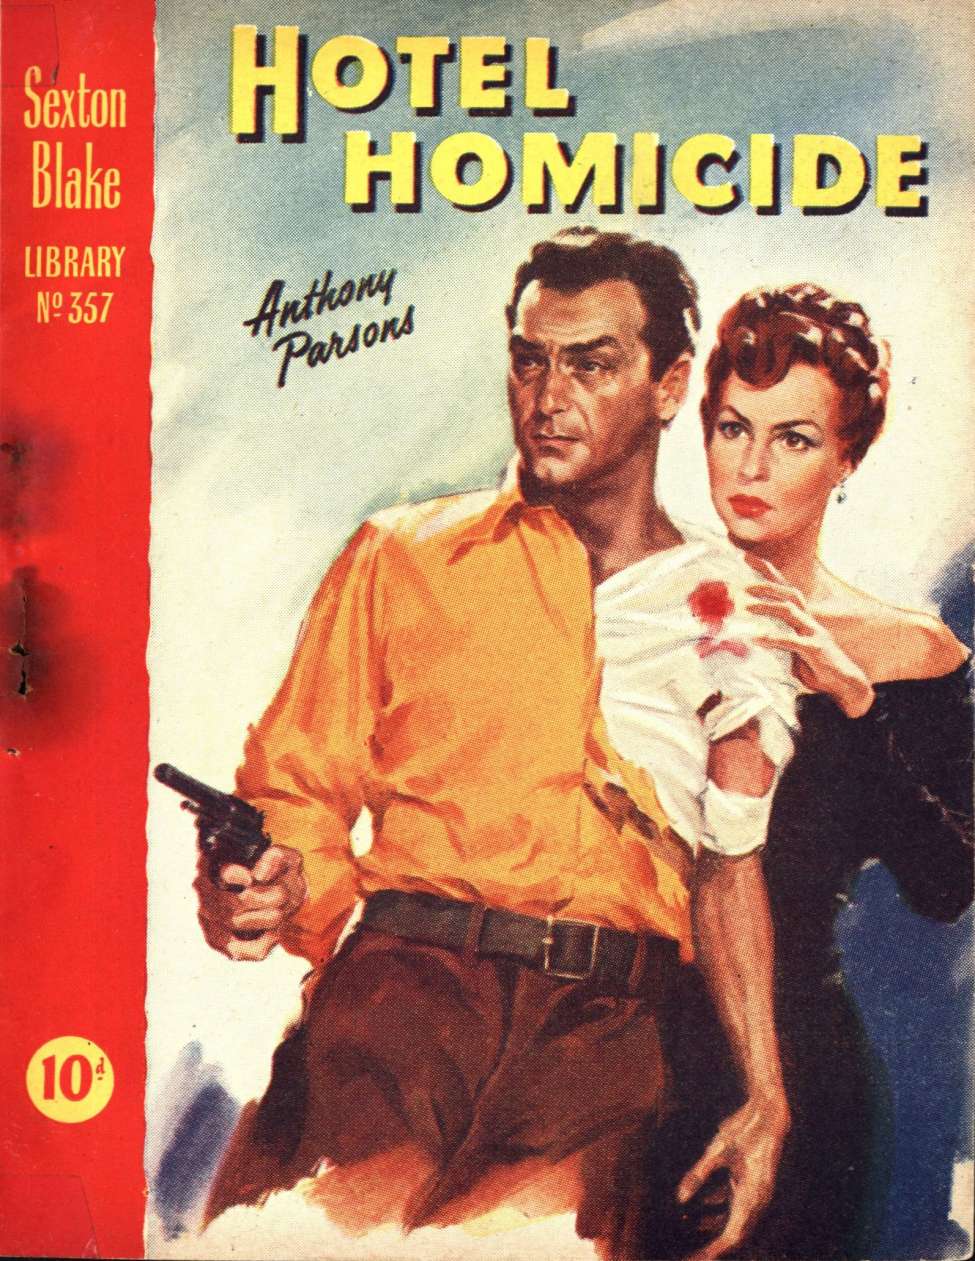 Comic Book Cover For Sexton Blake Library S3 357 - Hotel Homicide